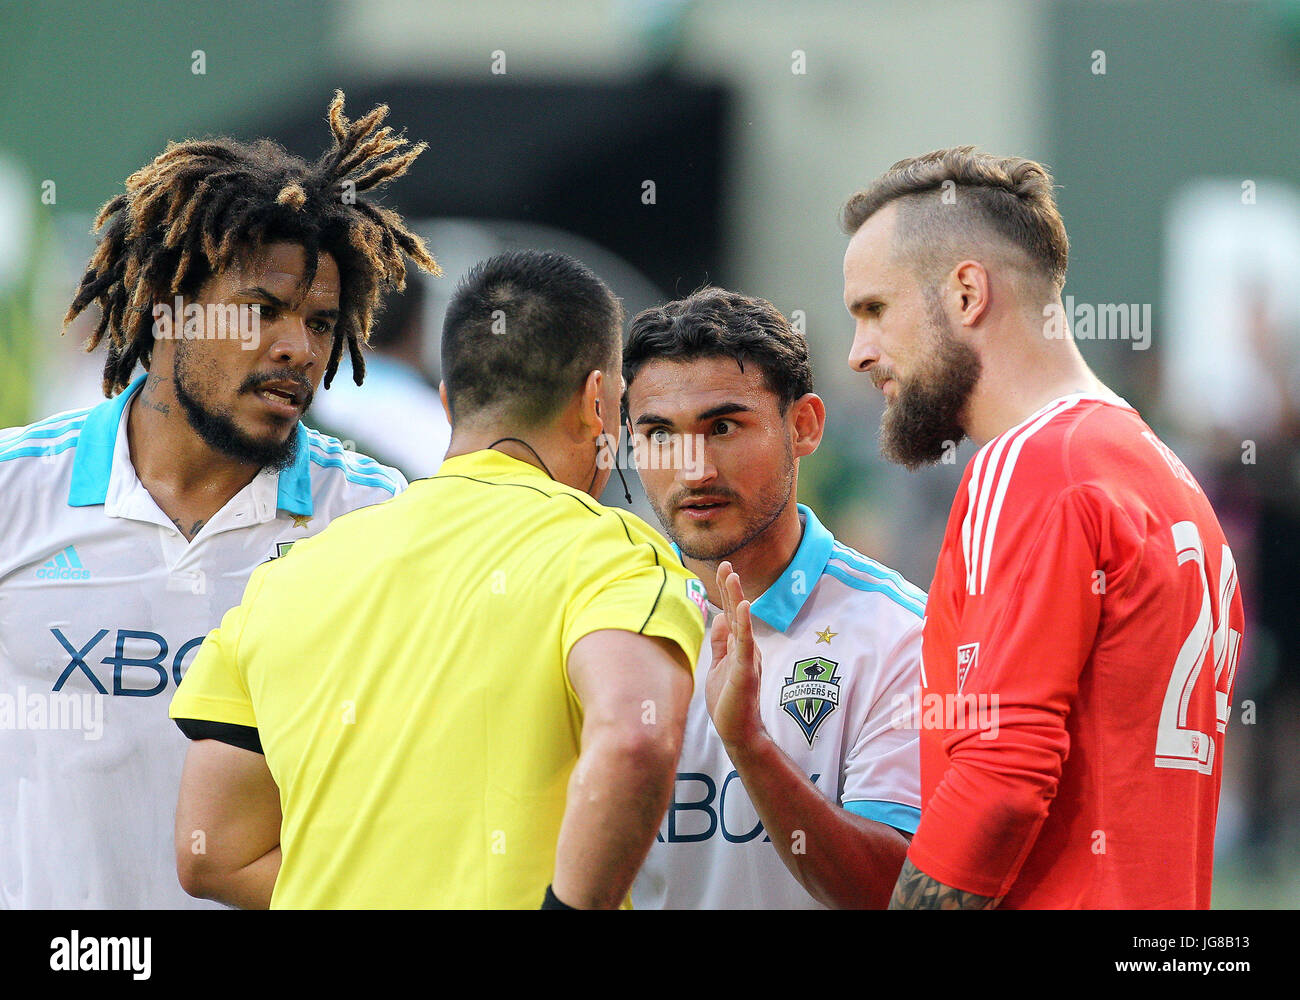 Providence Park, Portland, OR, USA. 25th June, 2017. Seattle Sounders defender Roman Torres (29), and Seattle Sounders goalkeeper Stefan Frei (24) argue with the field referee over a red card call during the MLS match between the visiting Seattle Sounders and the Portland Timbers at Providence Park, Portland, OR. Larry C. Lawson/CSM/Alamy Live News Stock Photo